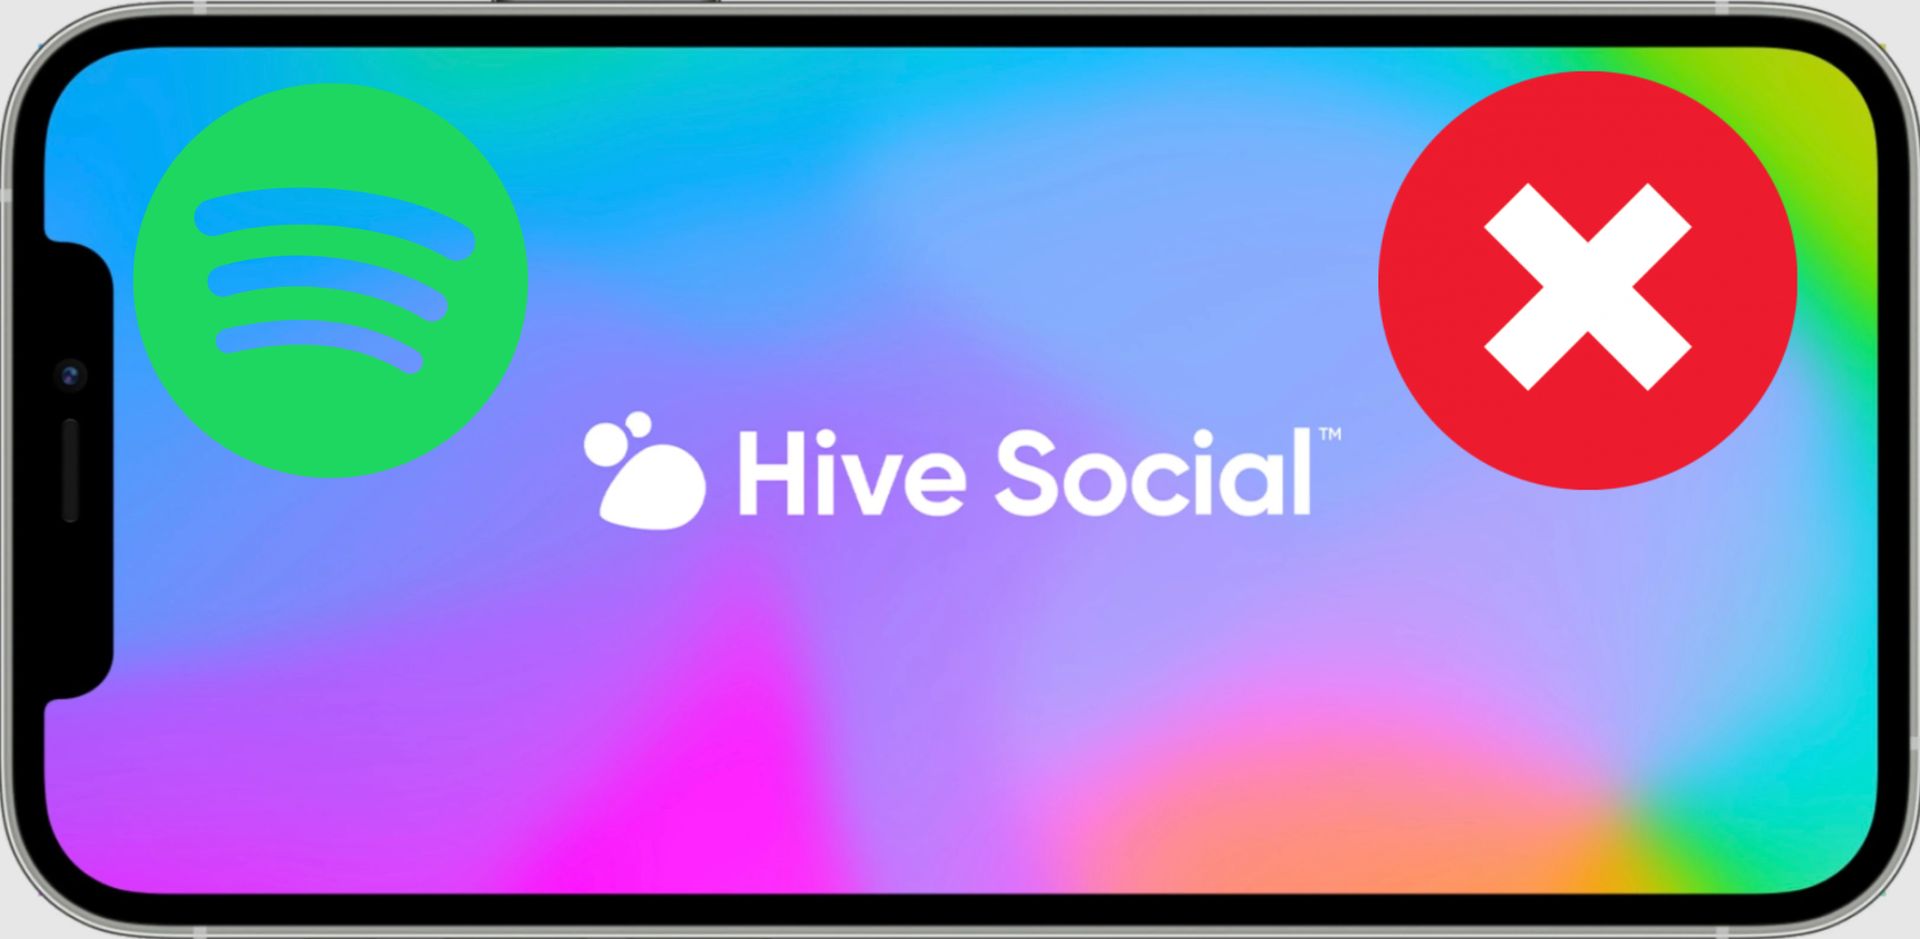 How to connect Spotify to Hive Social?